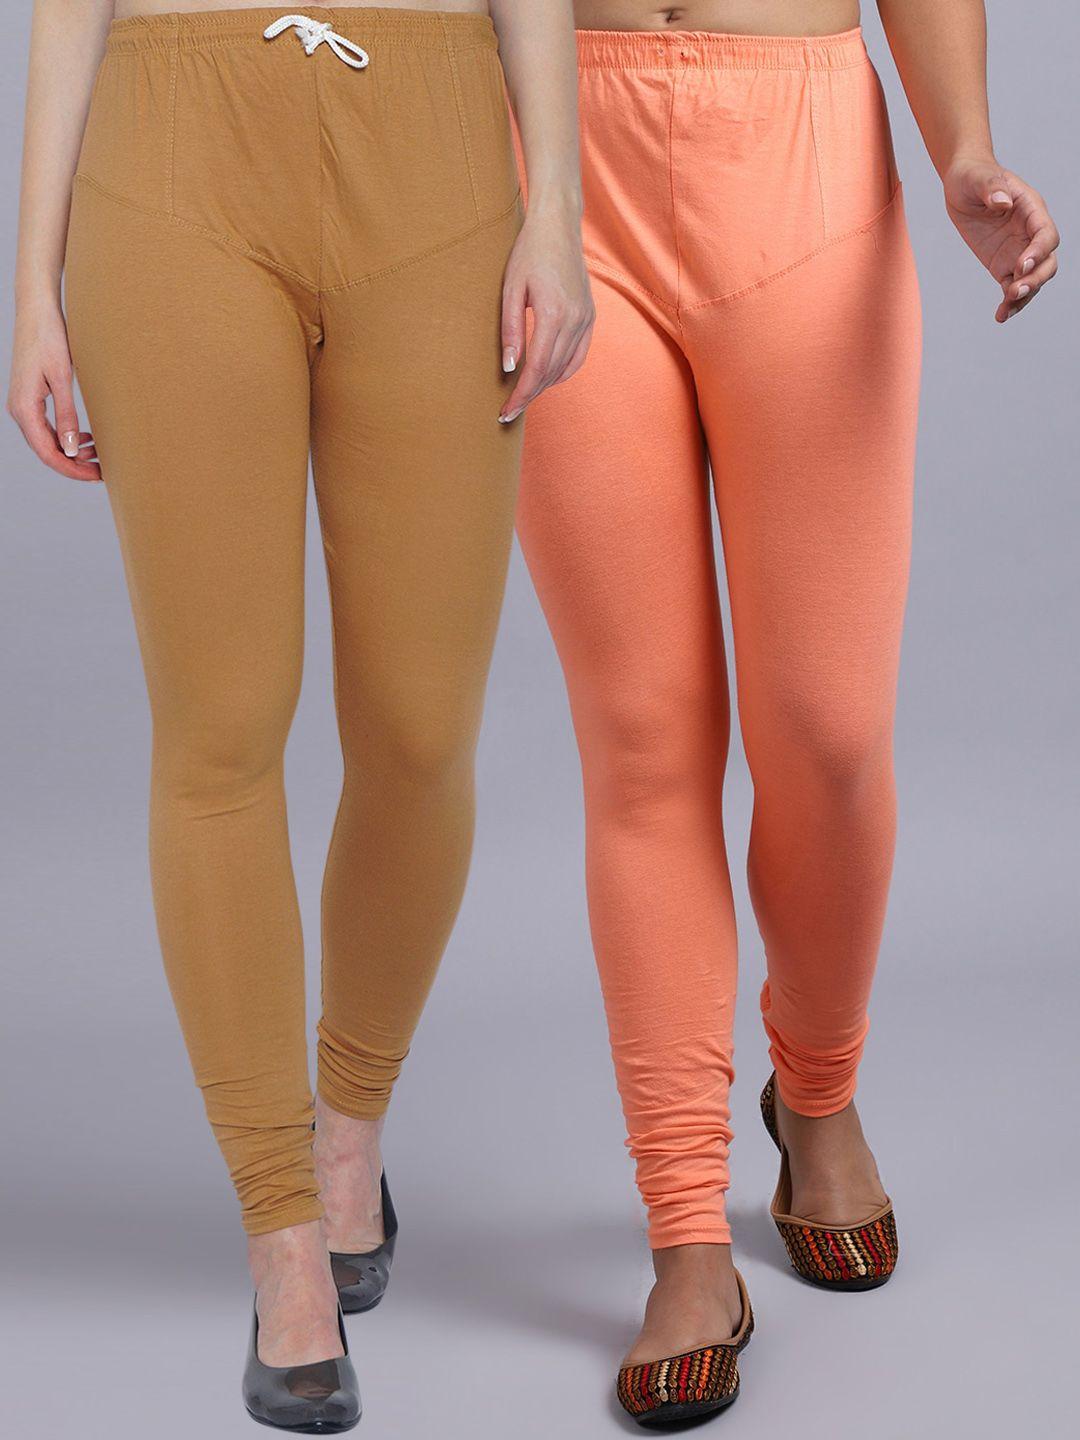 jinfo women pack of 2 peach colored & dark beige colored solid ankle length leggings